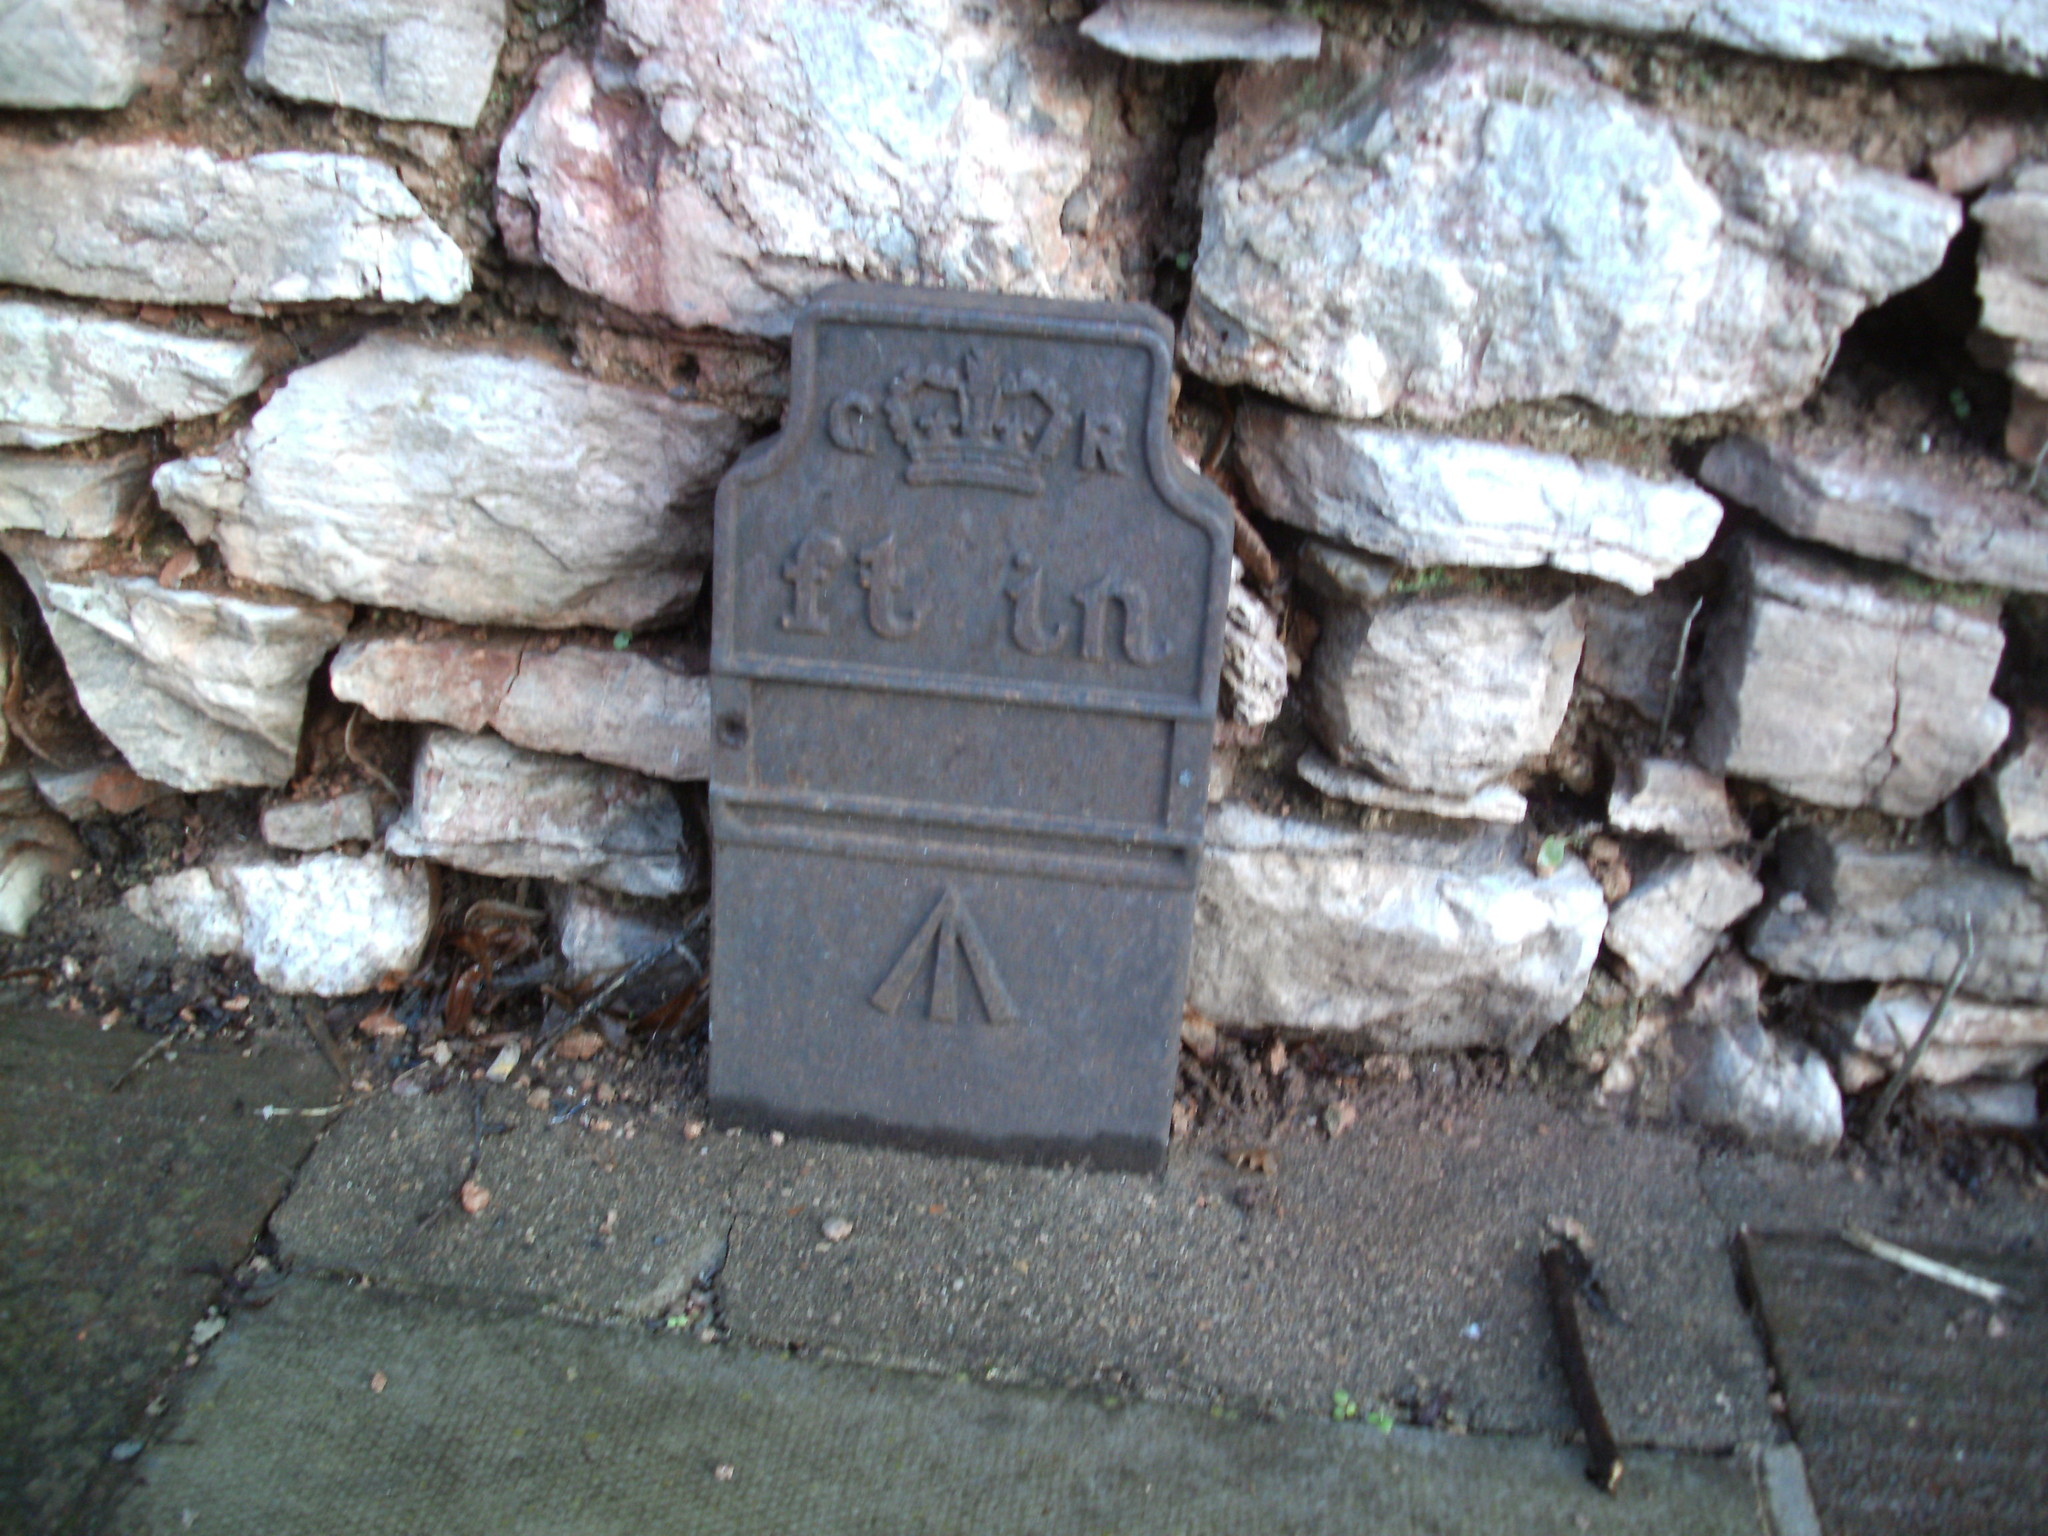 Telegraph cable marker post at Cleveland Road, Torquay by Les Eddy 